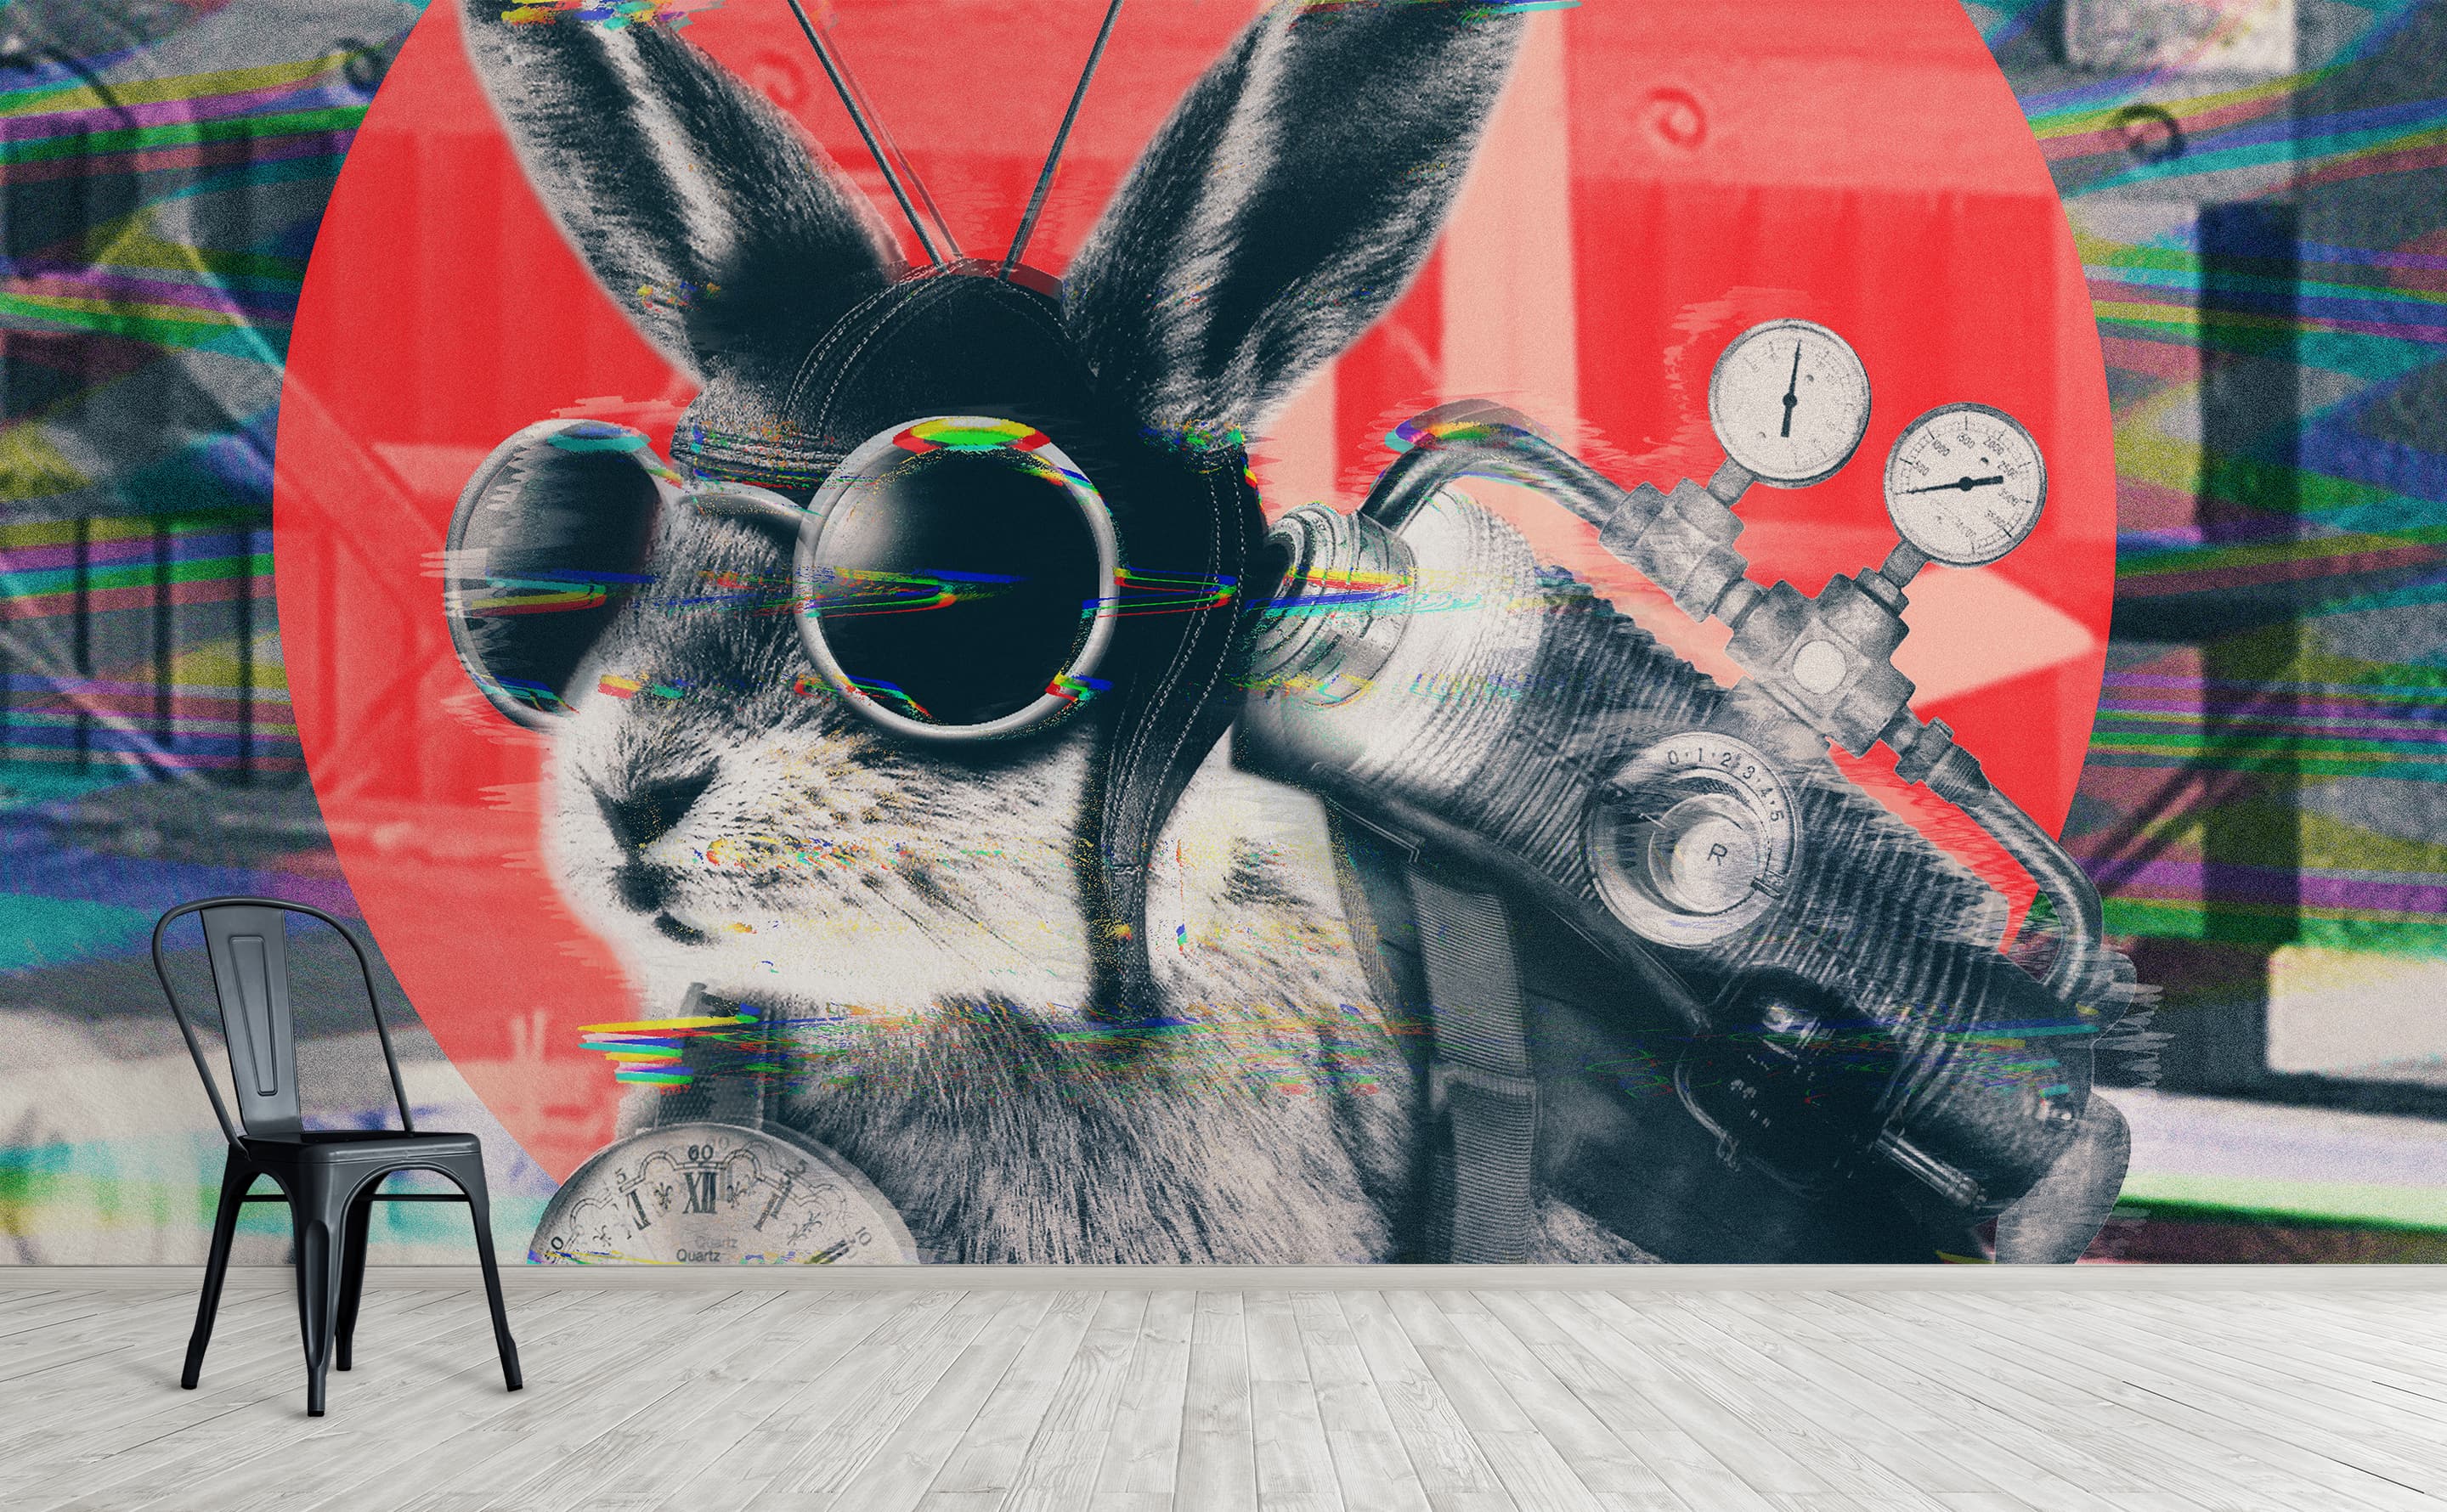 Time Traveler Wall Mural by Walls Need Loveﾮ